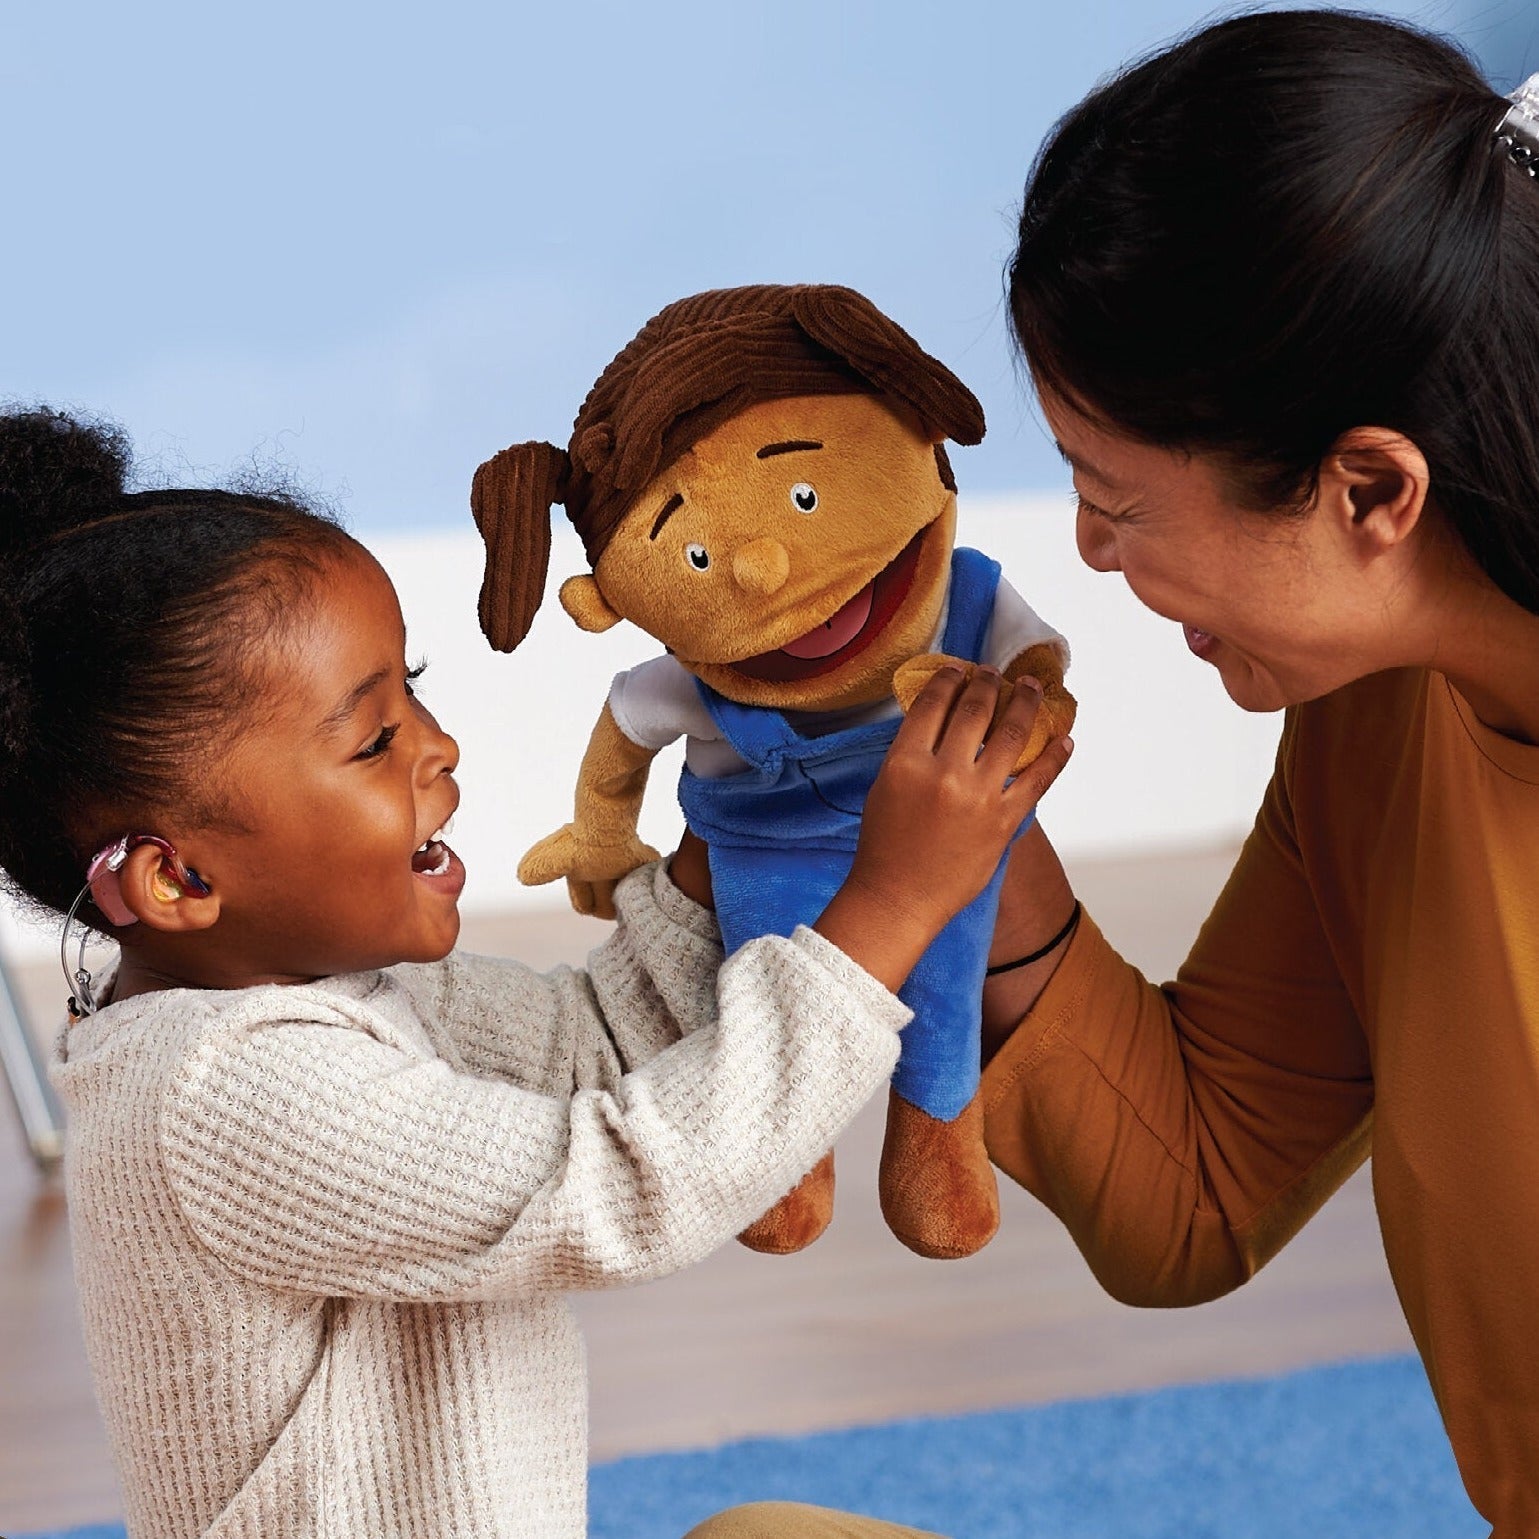 Gabby's Puppet, Discover the wonderful world of emotional learning and immersive play with Gabby, the puppet who is here to inspire creativity, nurture empathy, and encourage expressive communication in young learners. Pigtails and all, Gabby is ready to be the star in your little one's imaginative play landscape. Product Description Gabby's Puppet: Your Child's Imaginative Companion Designed with pigtails that are as lively as her spirit, Gabby is a puppet that stands at a delightful 14 inches long, making